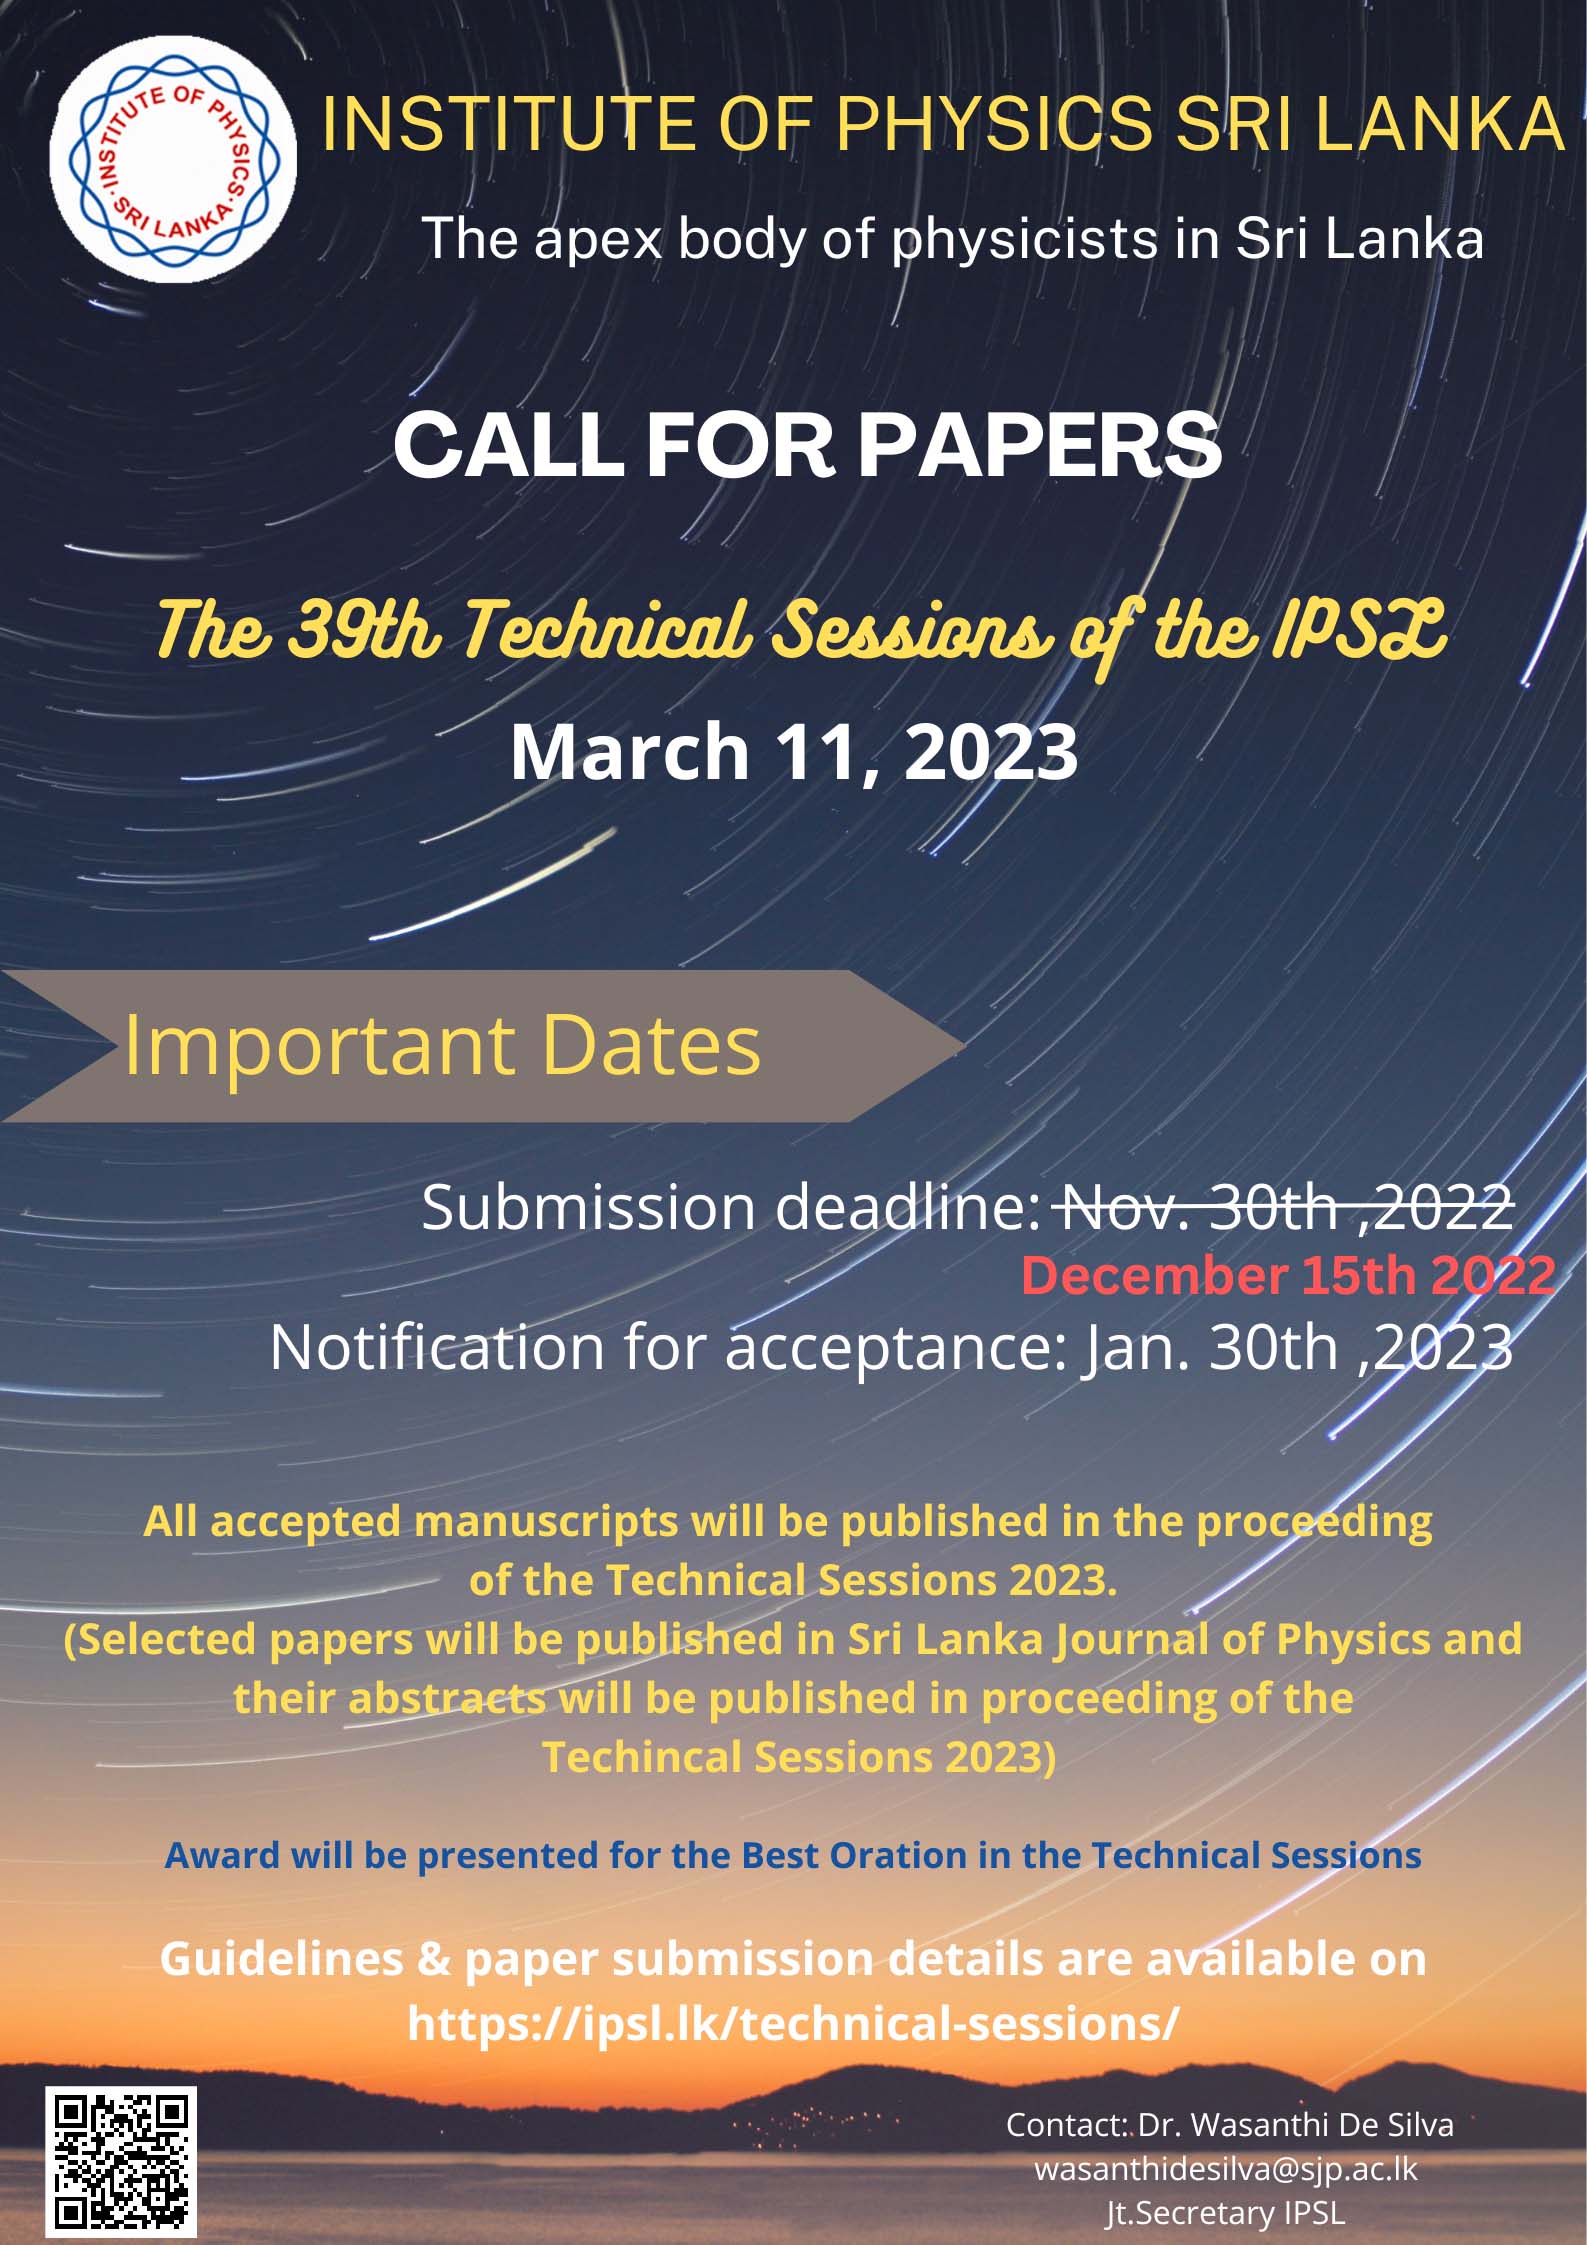 ipsl_call_for_papers_2023-v3